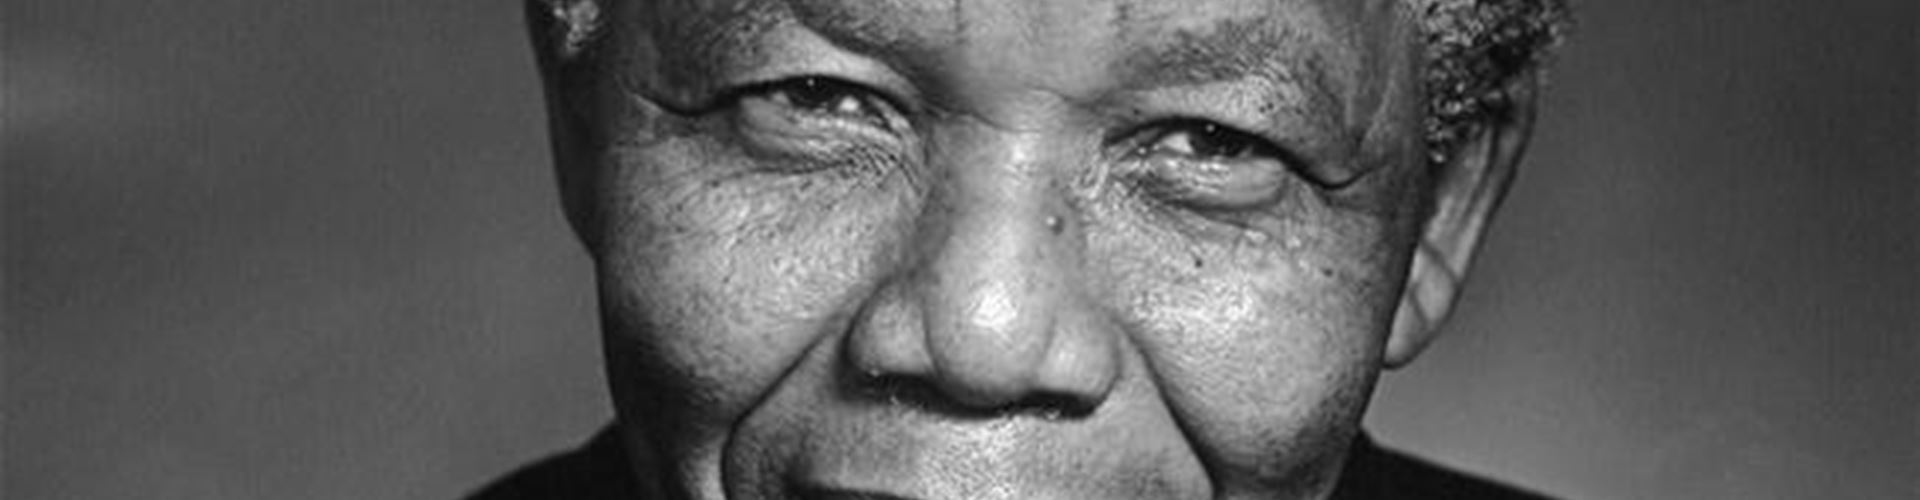 5 Leadership Lessons We Can Learn From Nelson Mandela